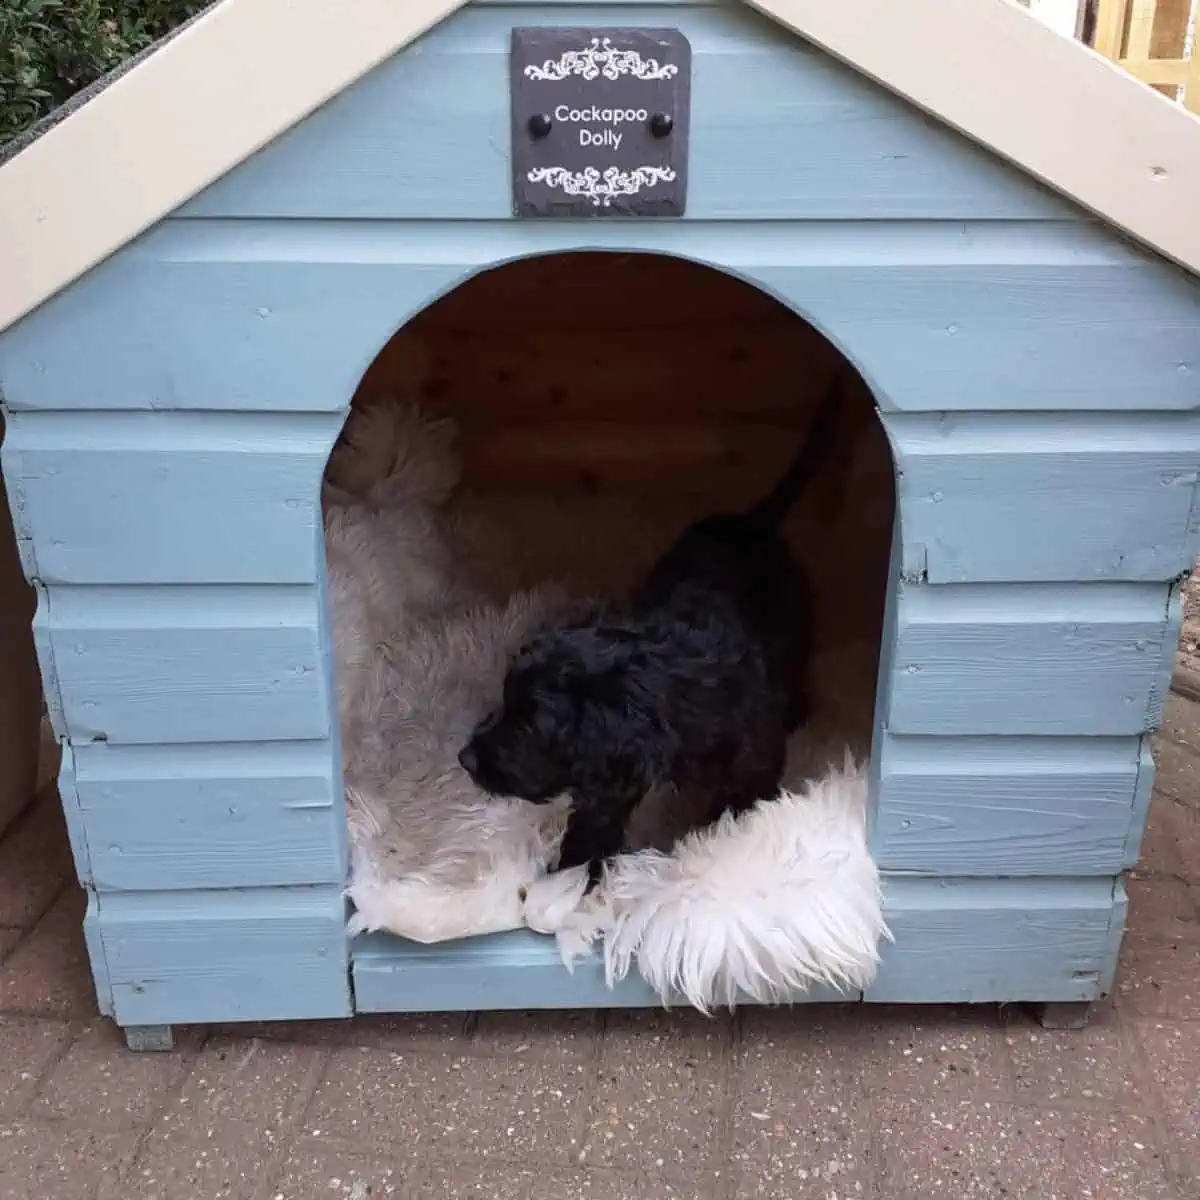 Toy Cockapoo inside kennel